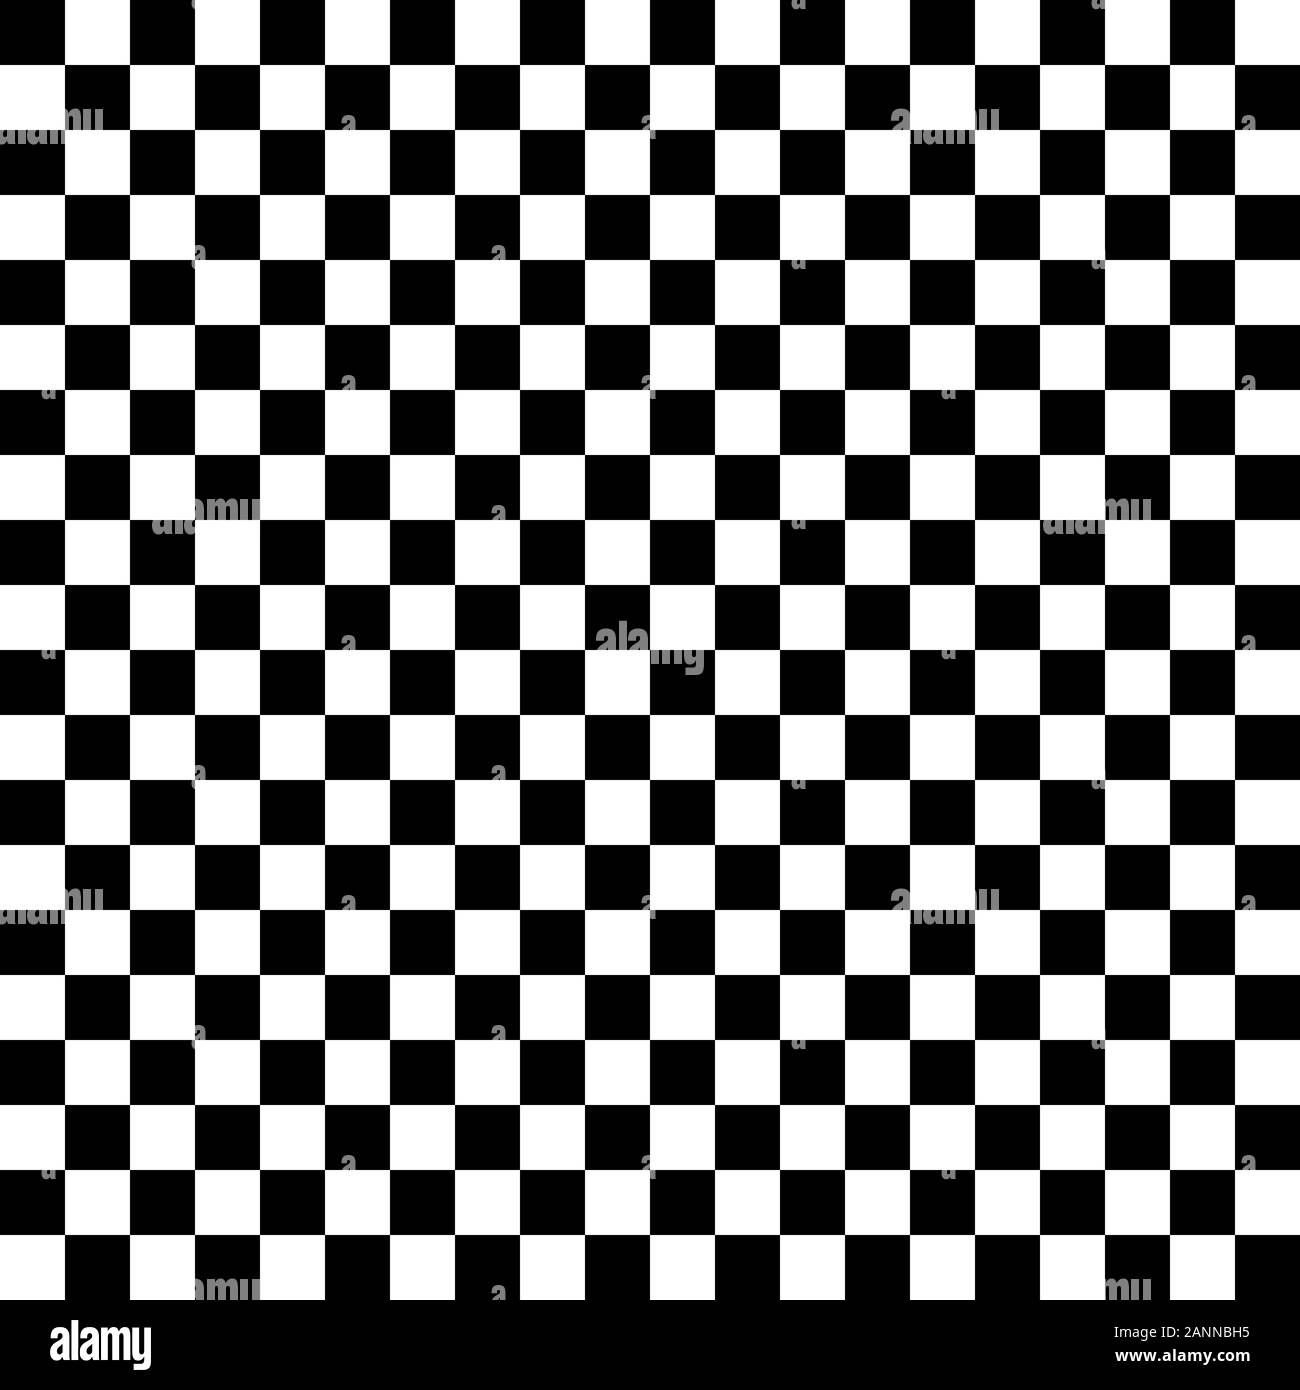 Black and white chess board - vector illustration.. Seamless pattern of black and white squares. Stock Vector